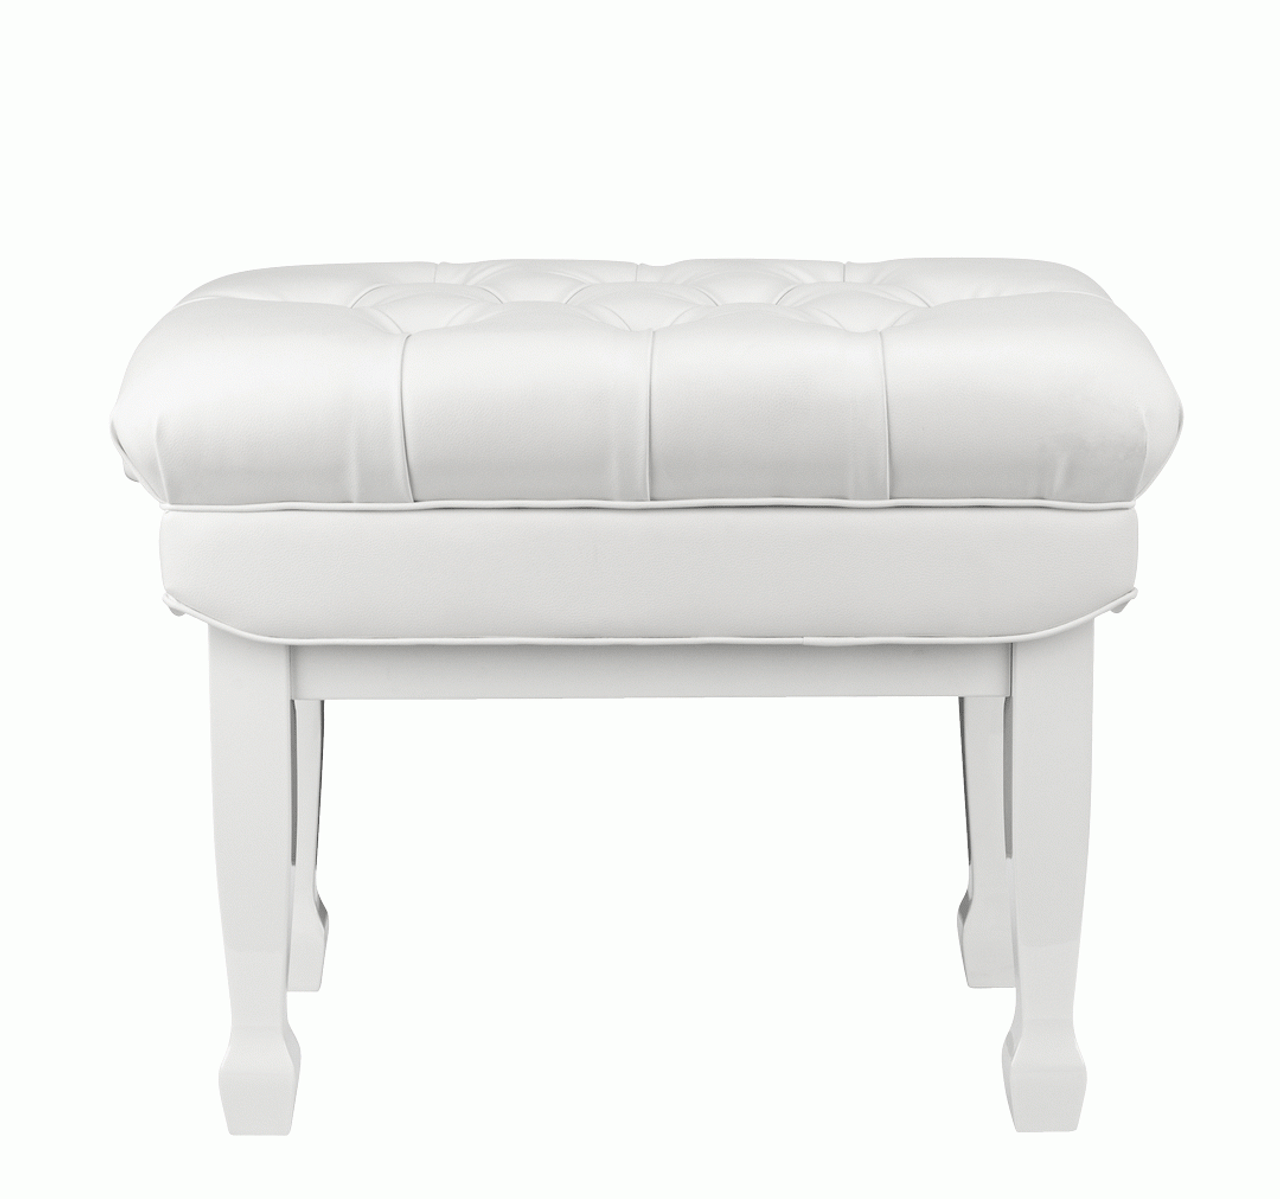 Beale BPB330WH Deluxe Grand Piano Bench in White